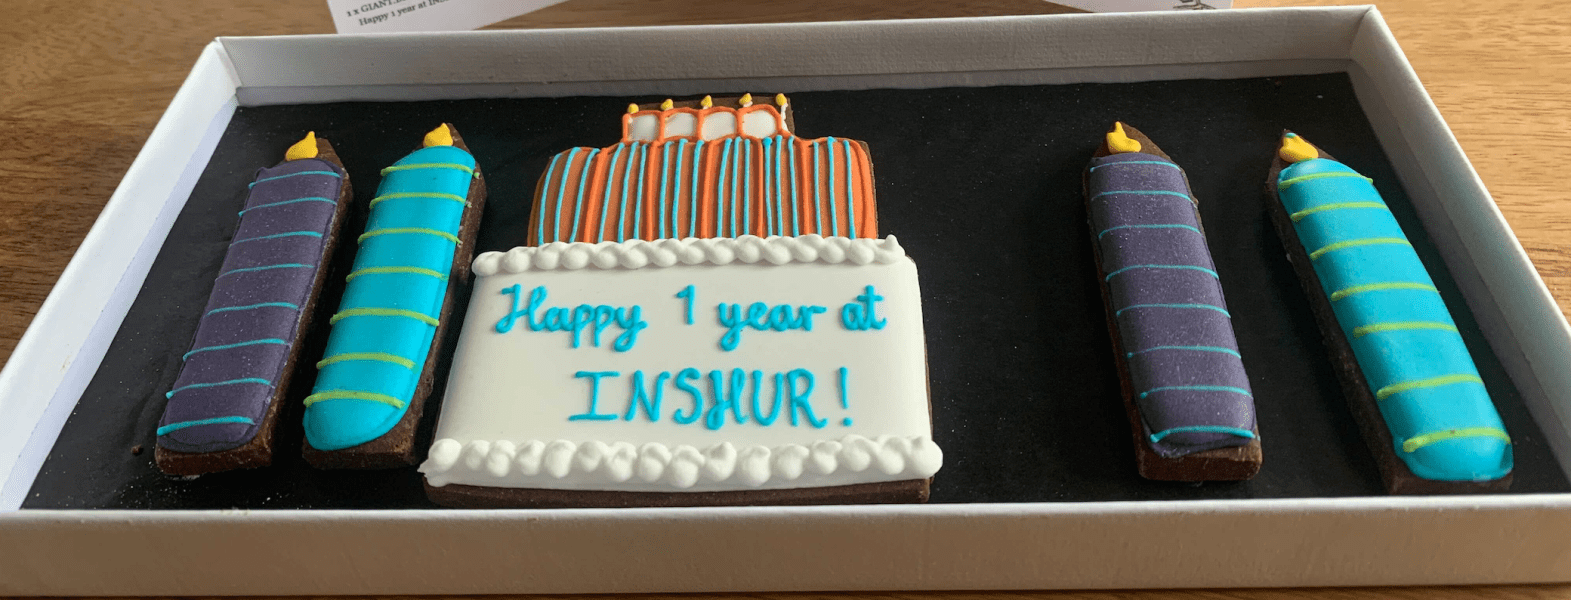 Taking stock: My first year at INSHUR